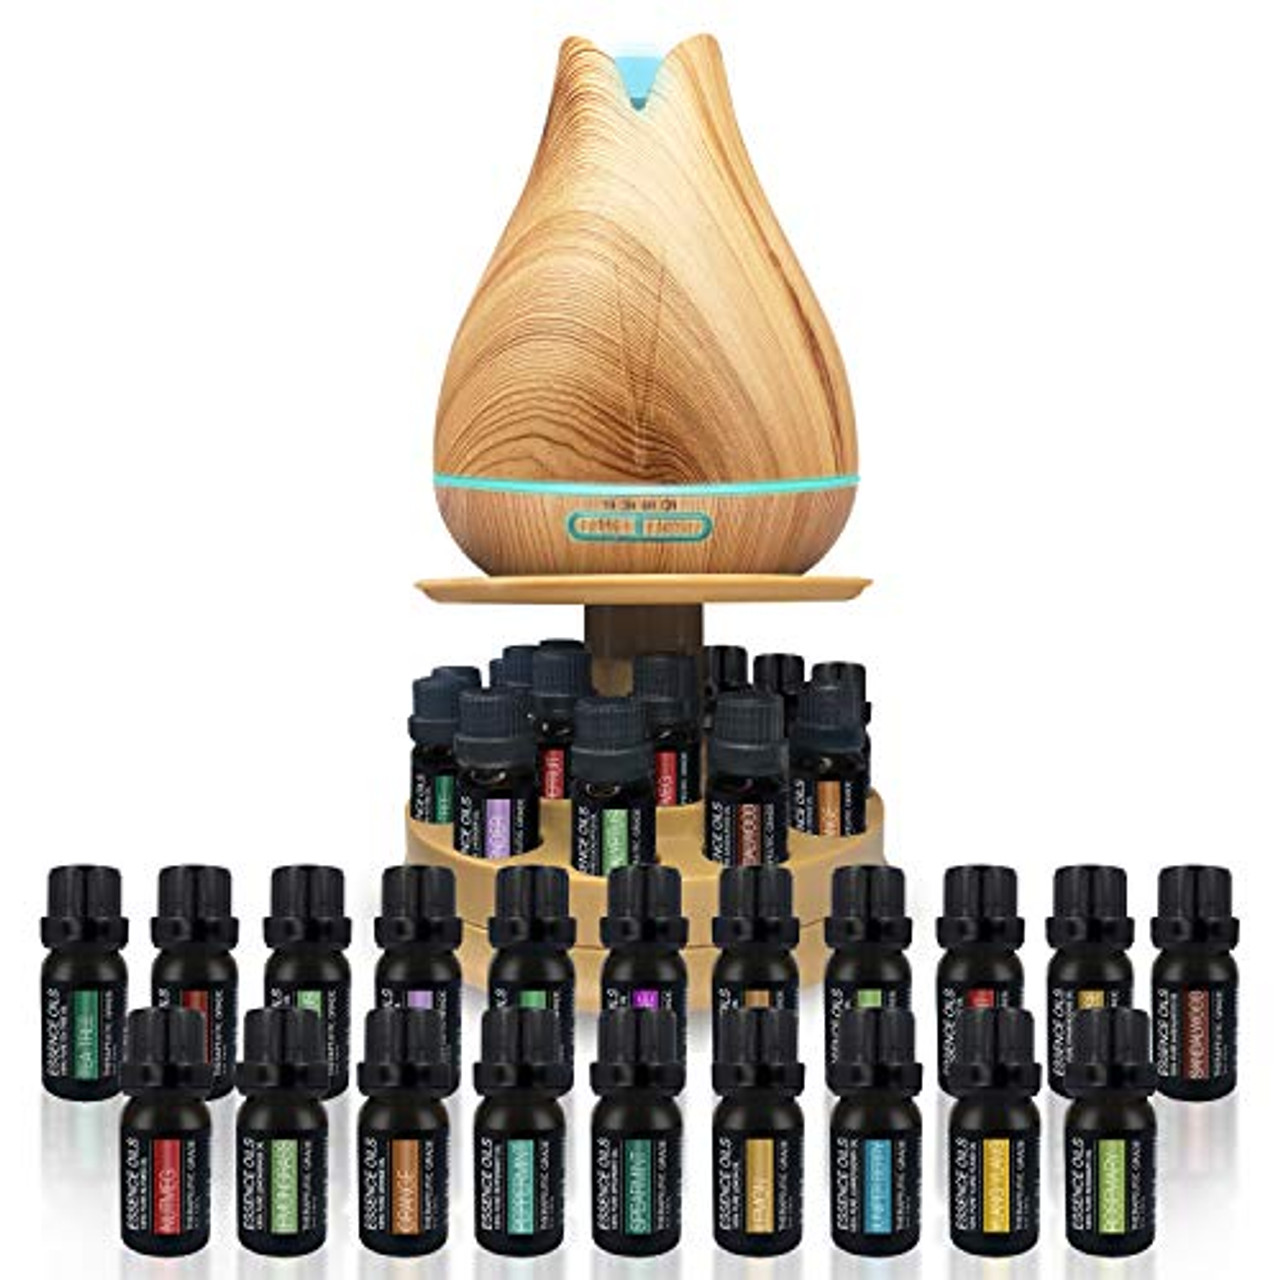 Essential Oil Diffuser & Top 8 Essential Oils Set, 7 Ambient Lights, 300ml  Aromatherapy Diffuser with 3 Timer & 2 Mist Levels, Waterless Auto-Off